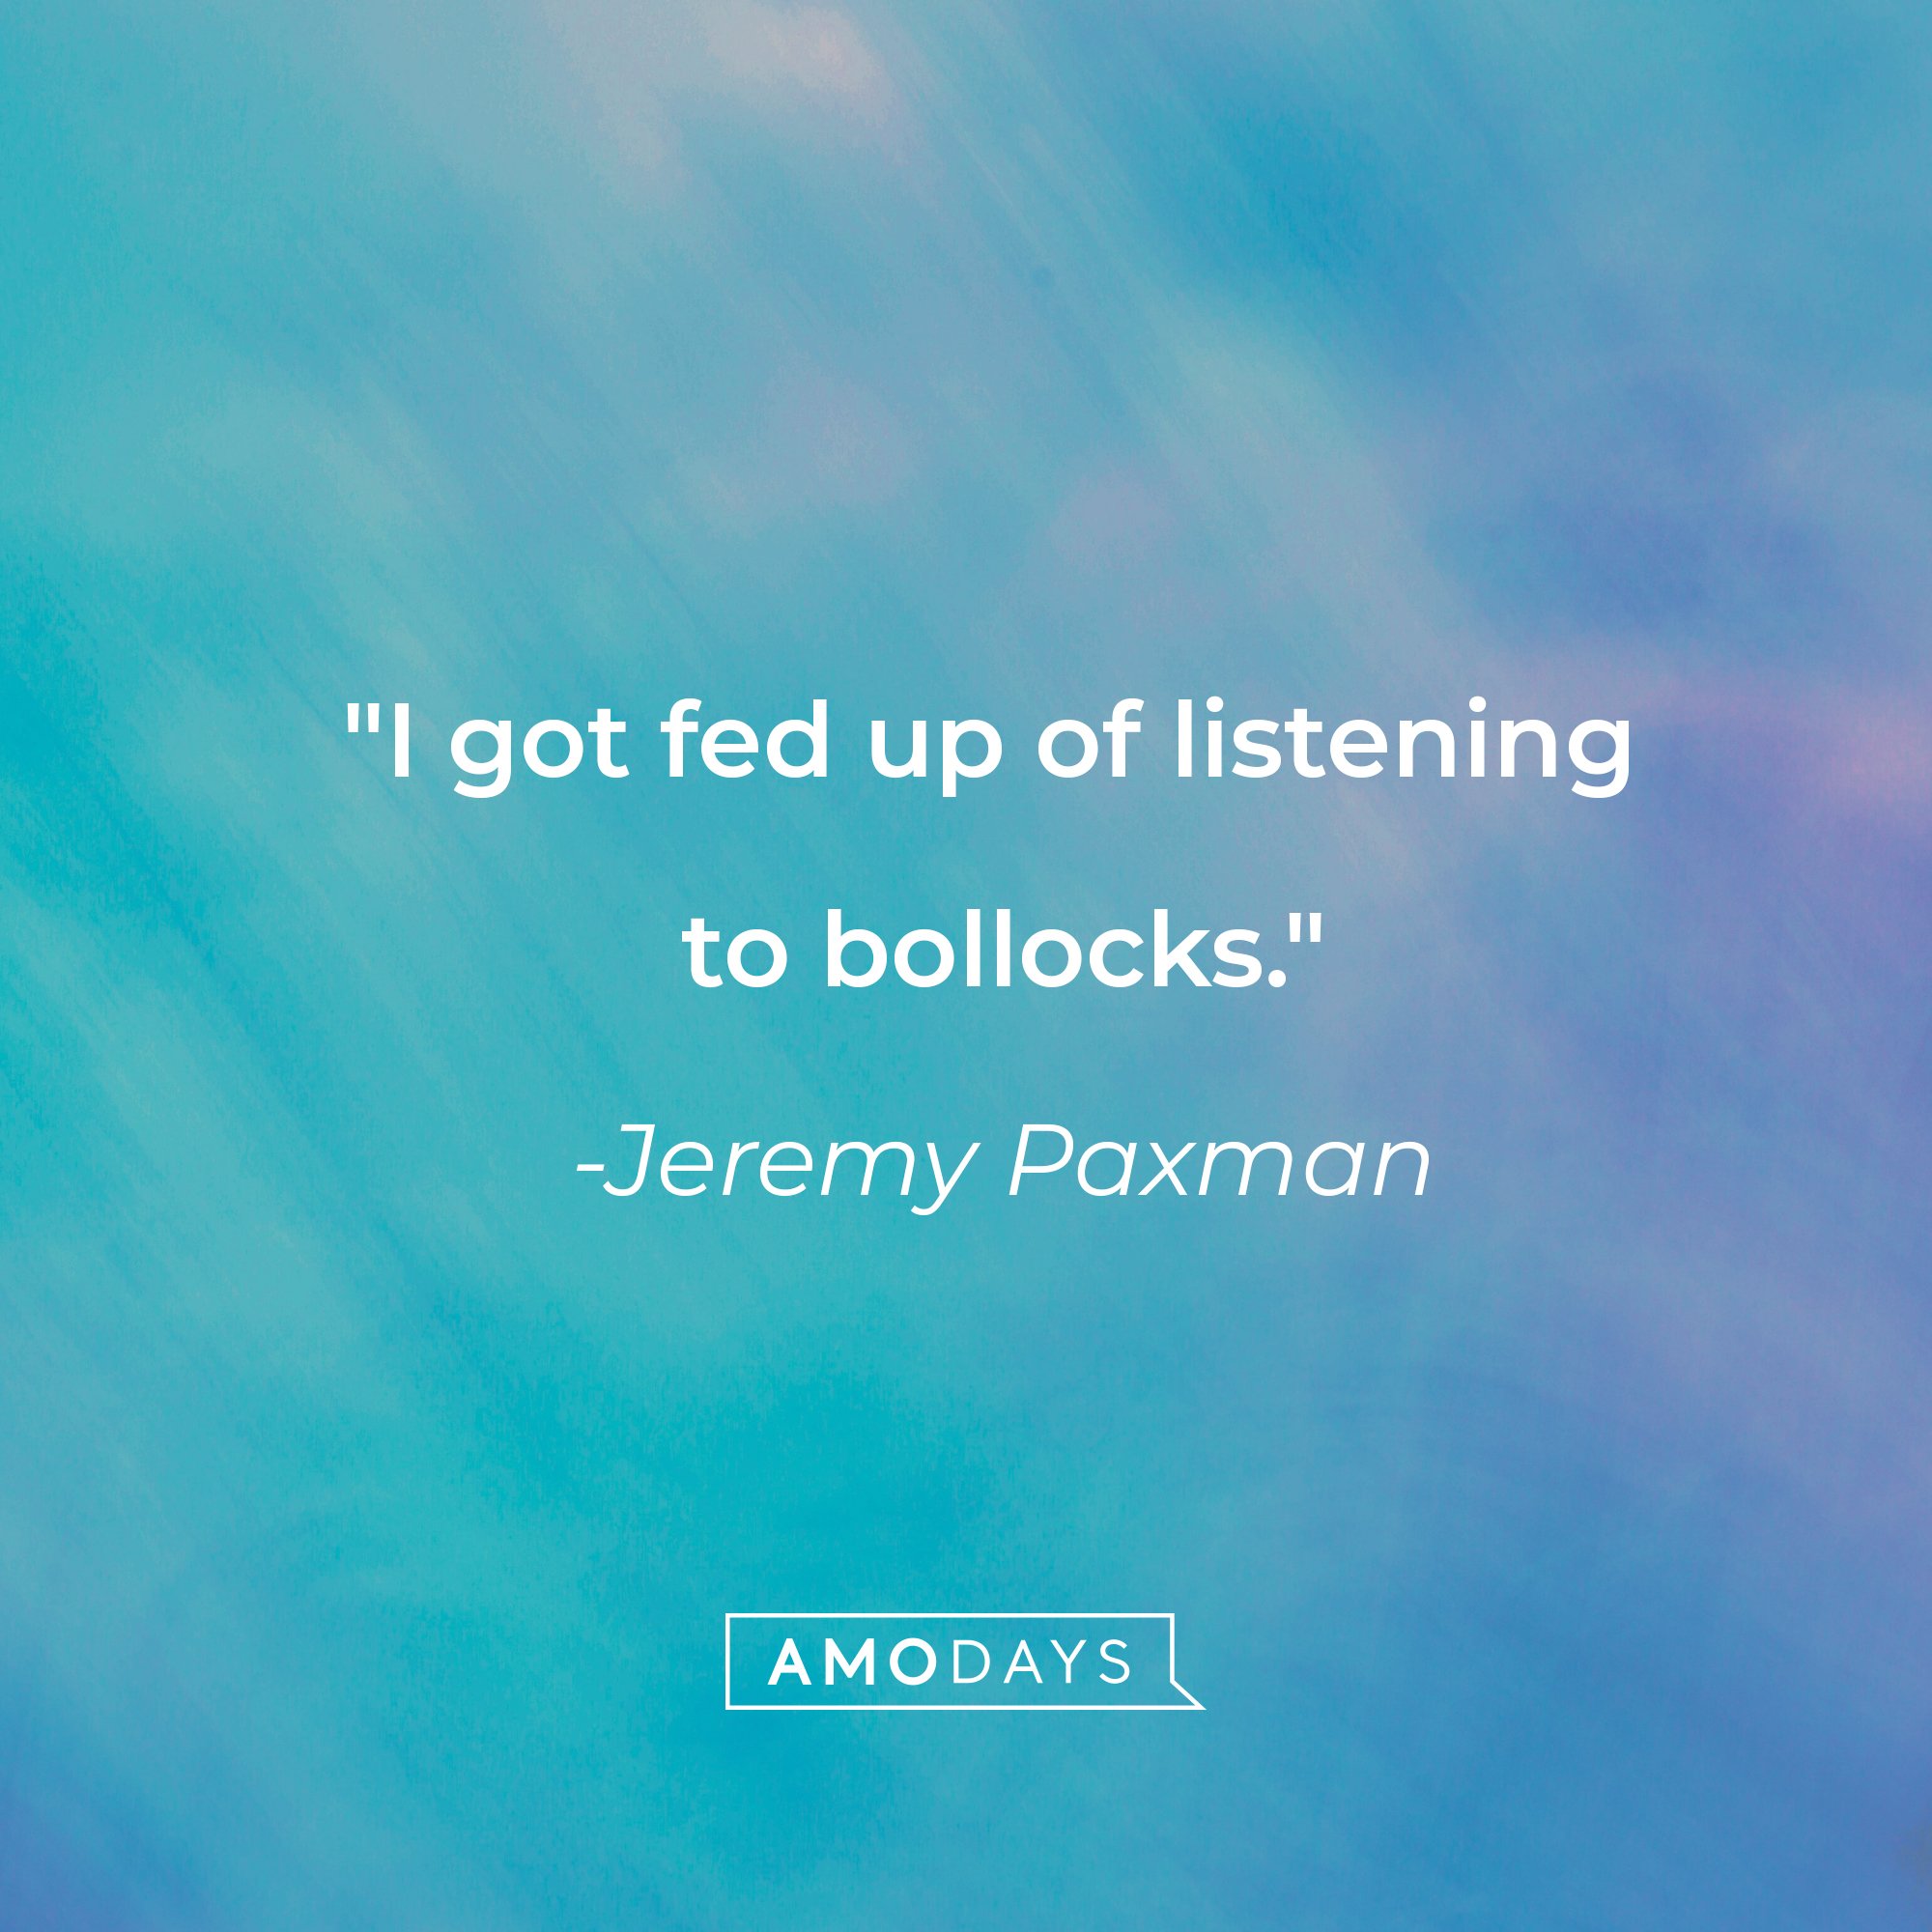 Jeremy Paxman's quote: "I got fed up of listening to bollocks." | Source: AmoDays